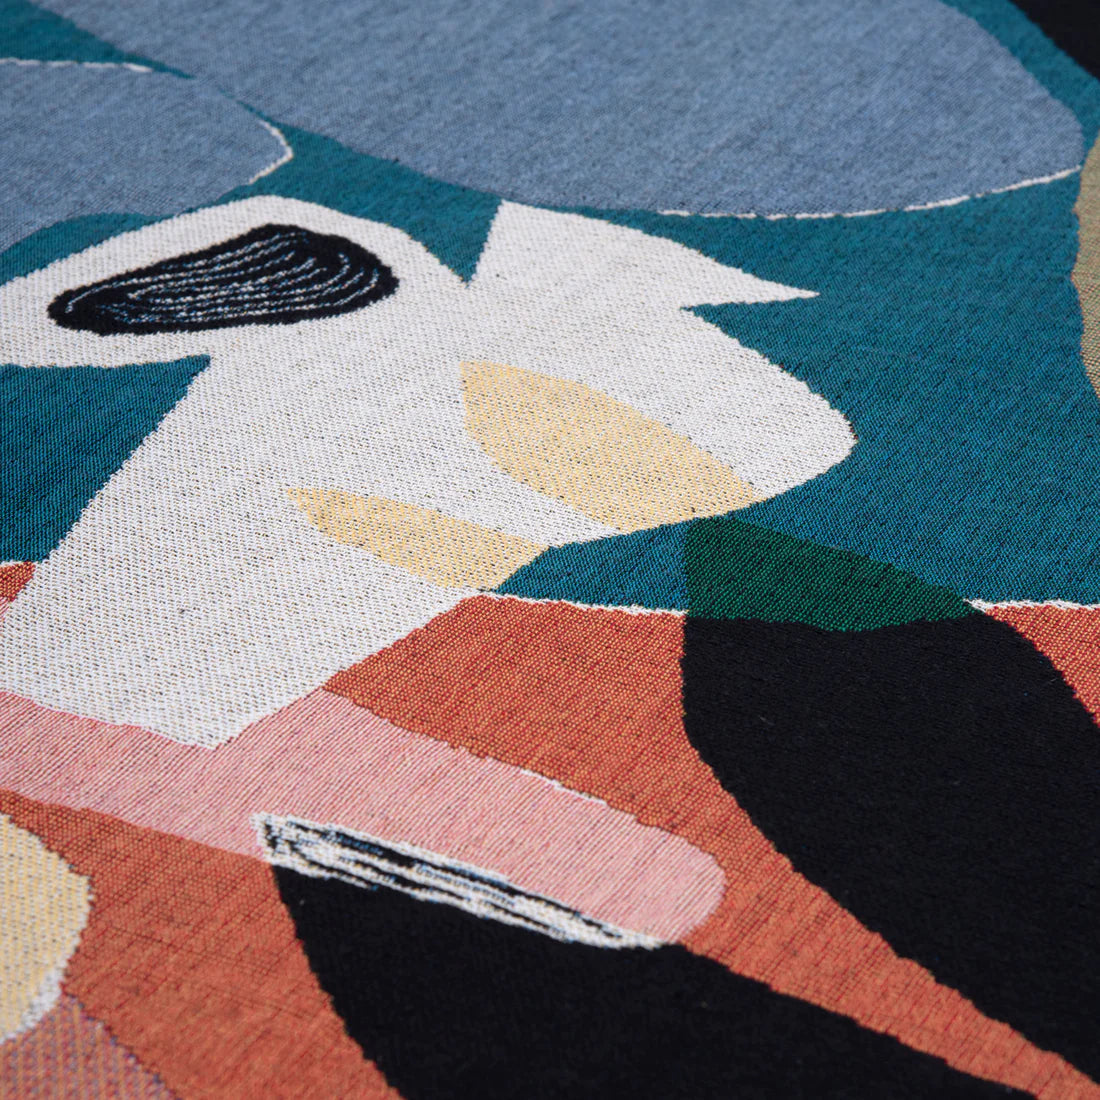 Detail shot of a colourful illustrated throw blanket in orange, greens, white and black 